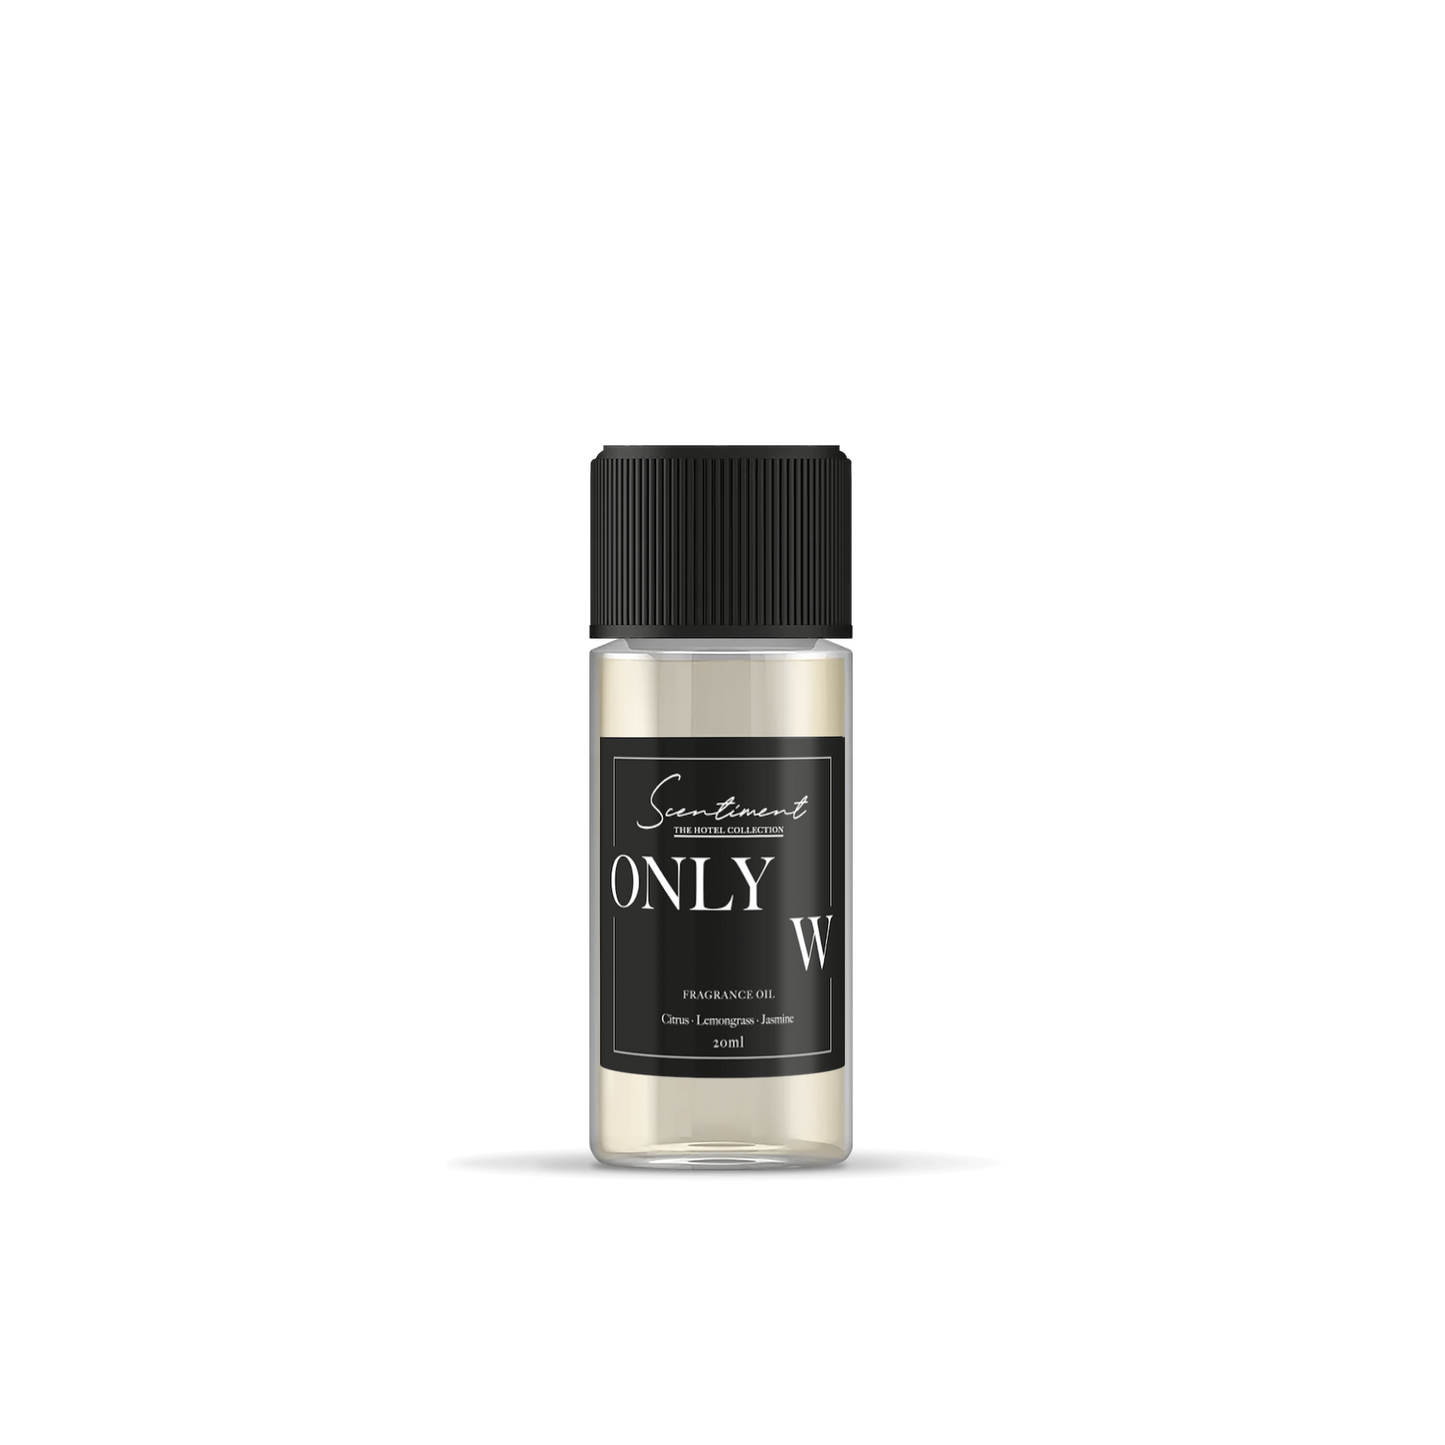 Only W Fragrance Oil, inspired by W® hotels, with notes of Citurs, Lemongrass, and Jasmine.